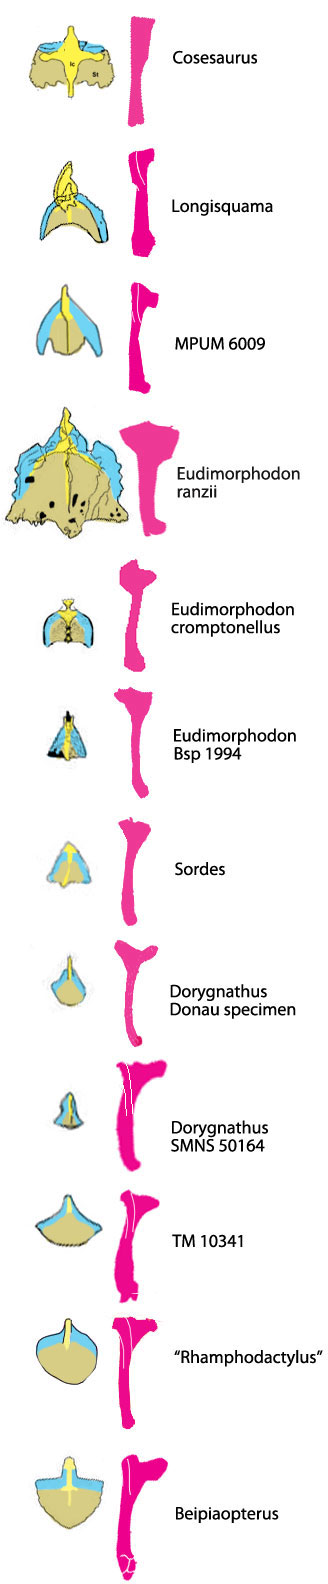 Figure 1. A series of fenestrasaur and pterosaur sternal complexes scaled to a common humerus length in phylogenetic order.